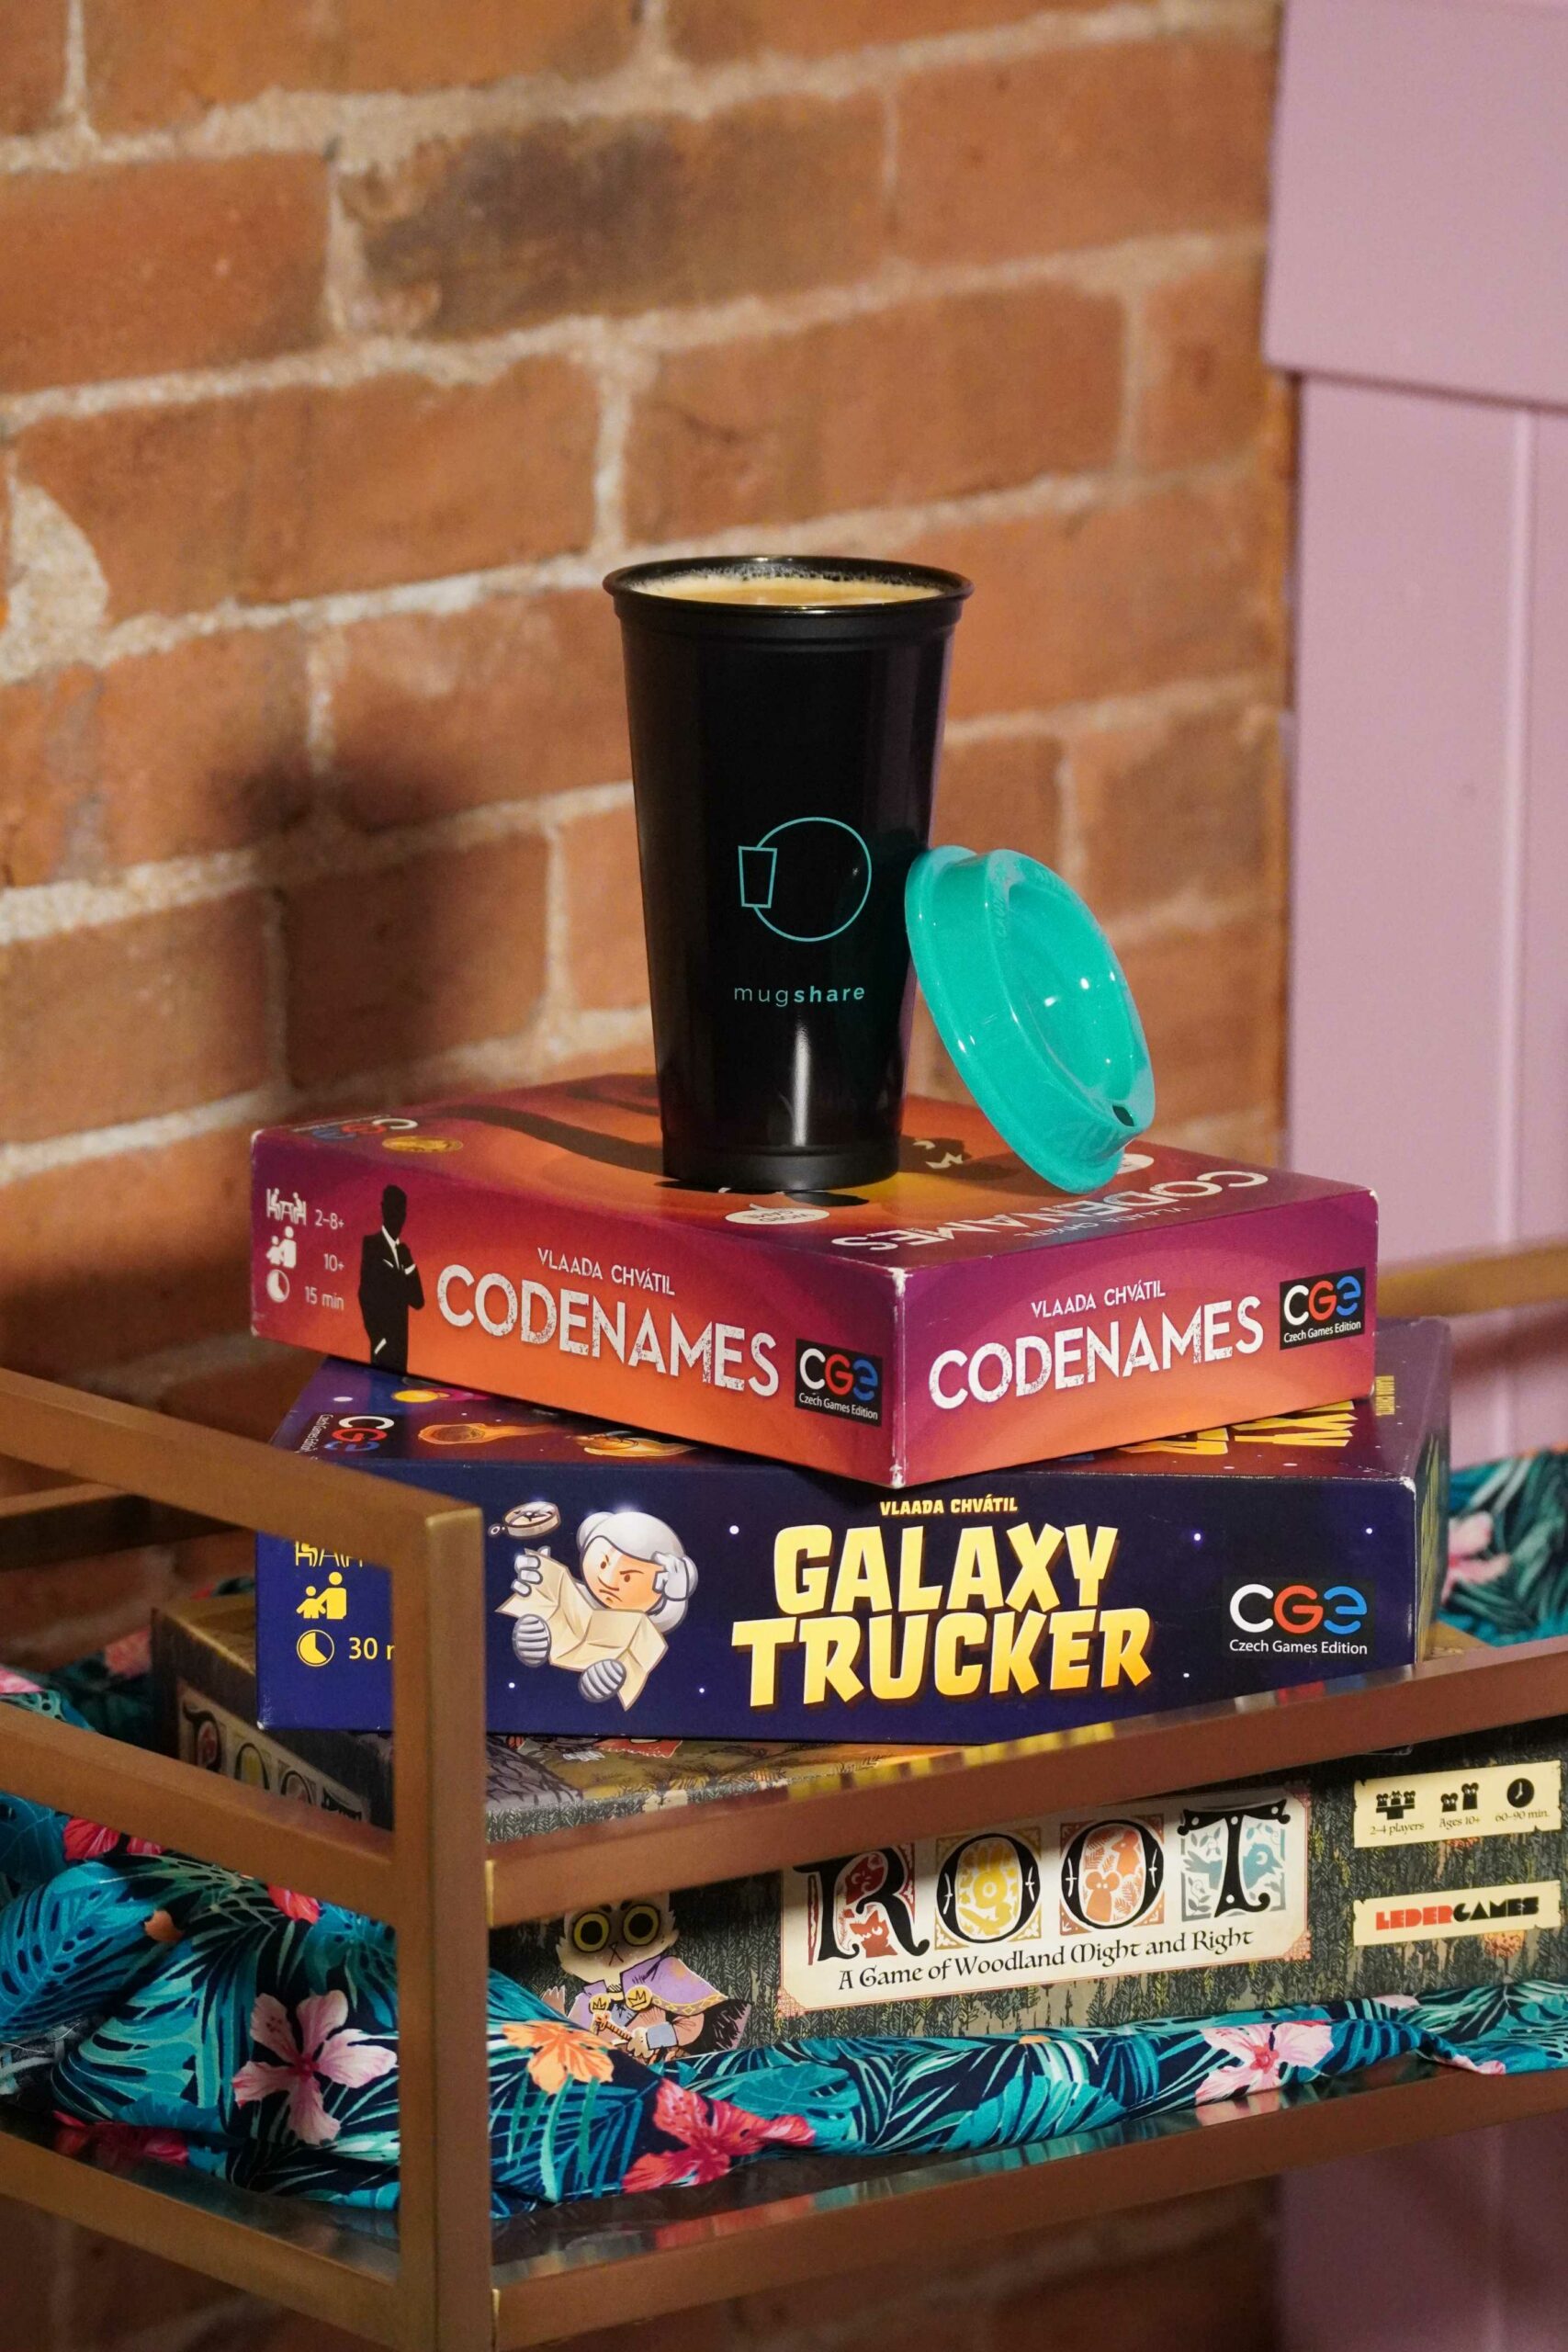 Stack of board games, with Code Names at the top, with a Mugshare mug on top filled with coffee. The board games are on a blue Hawaiian chair cushion behind a brick wall.